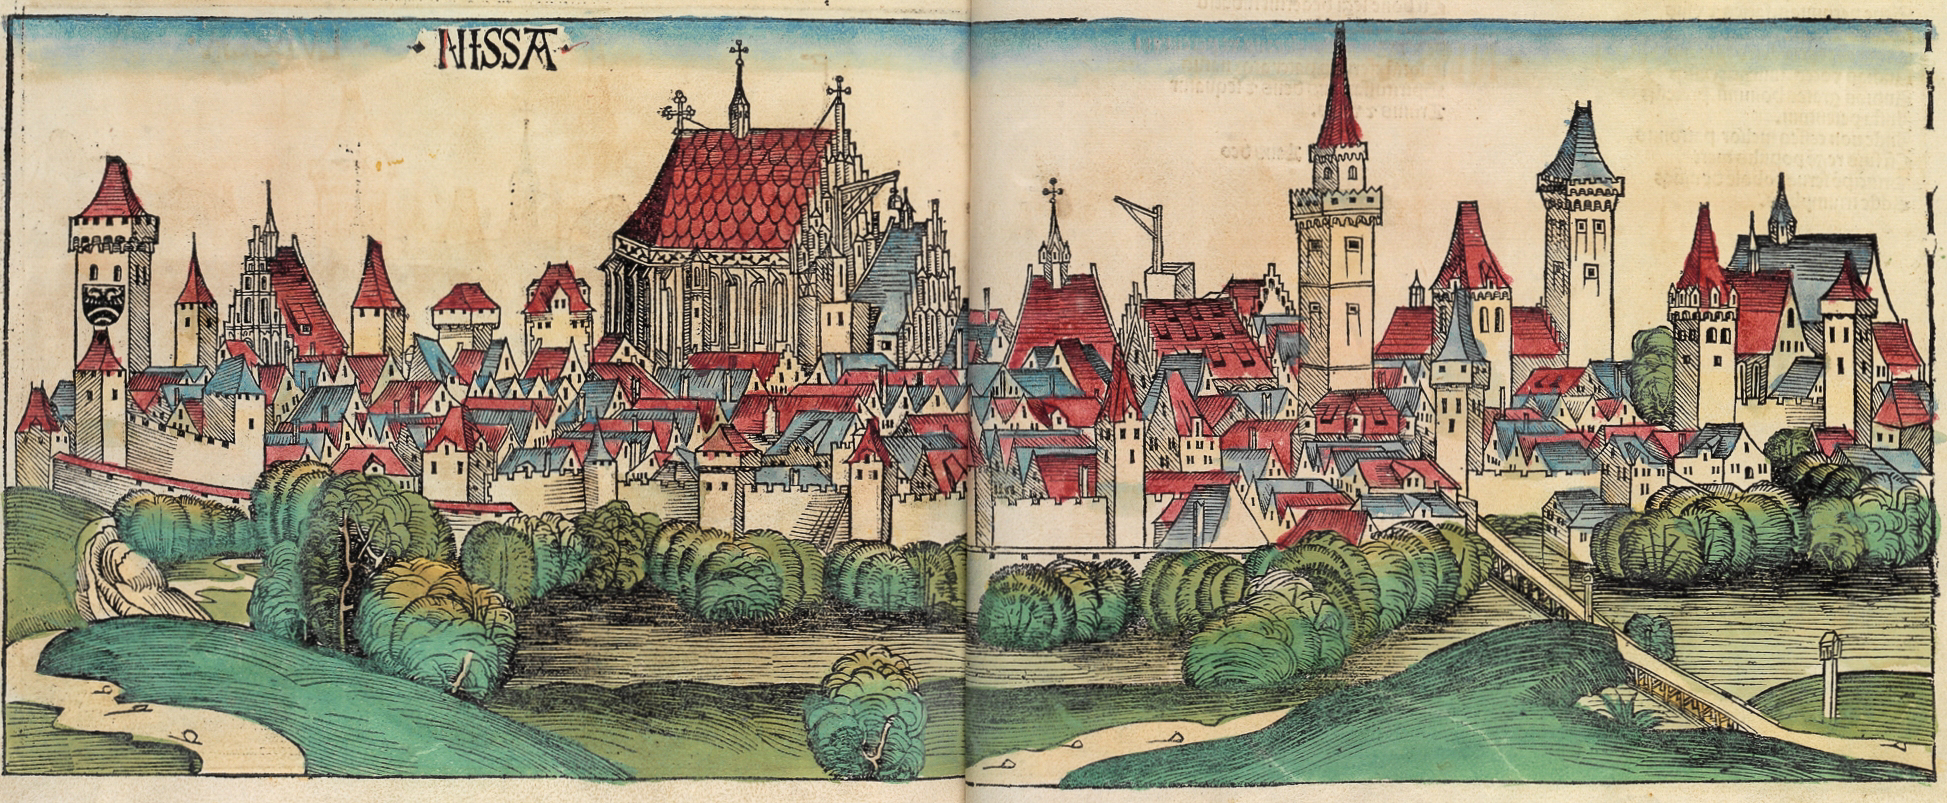 Fig. 1. View of Nysa (Silesia), from the Nuremberg Chronicle (Schedelsche Weltchronik), 1493. Public domain, via Wikimedia Commons.